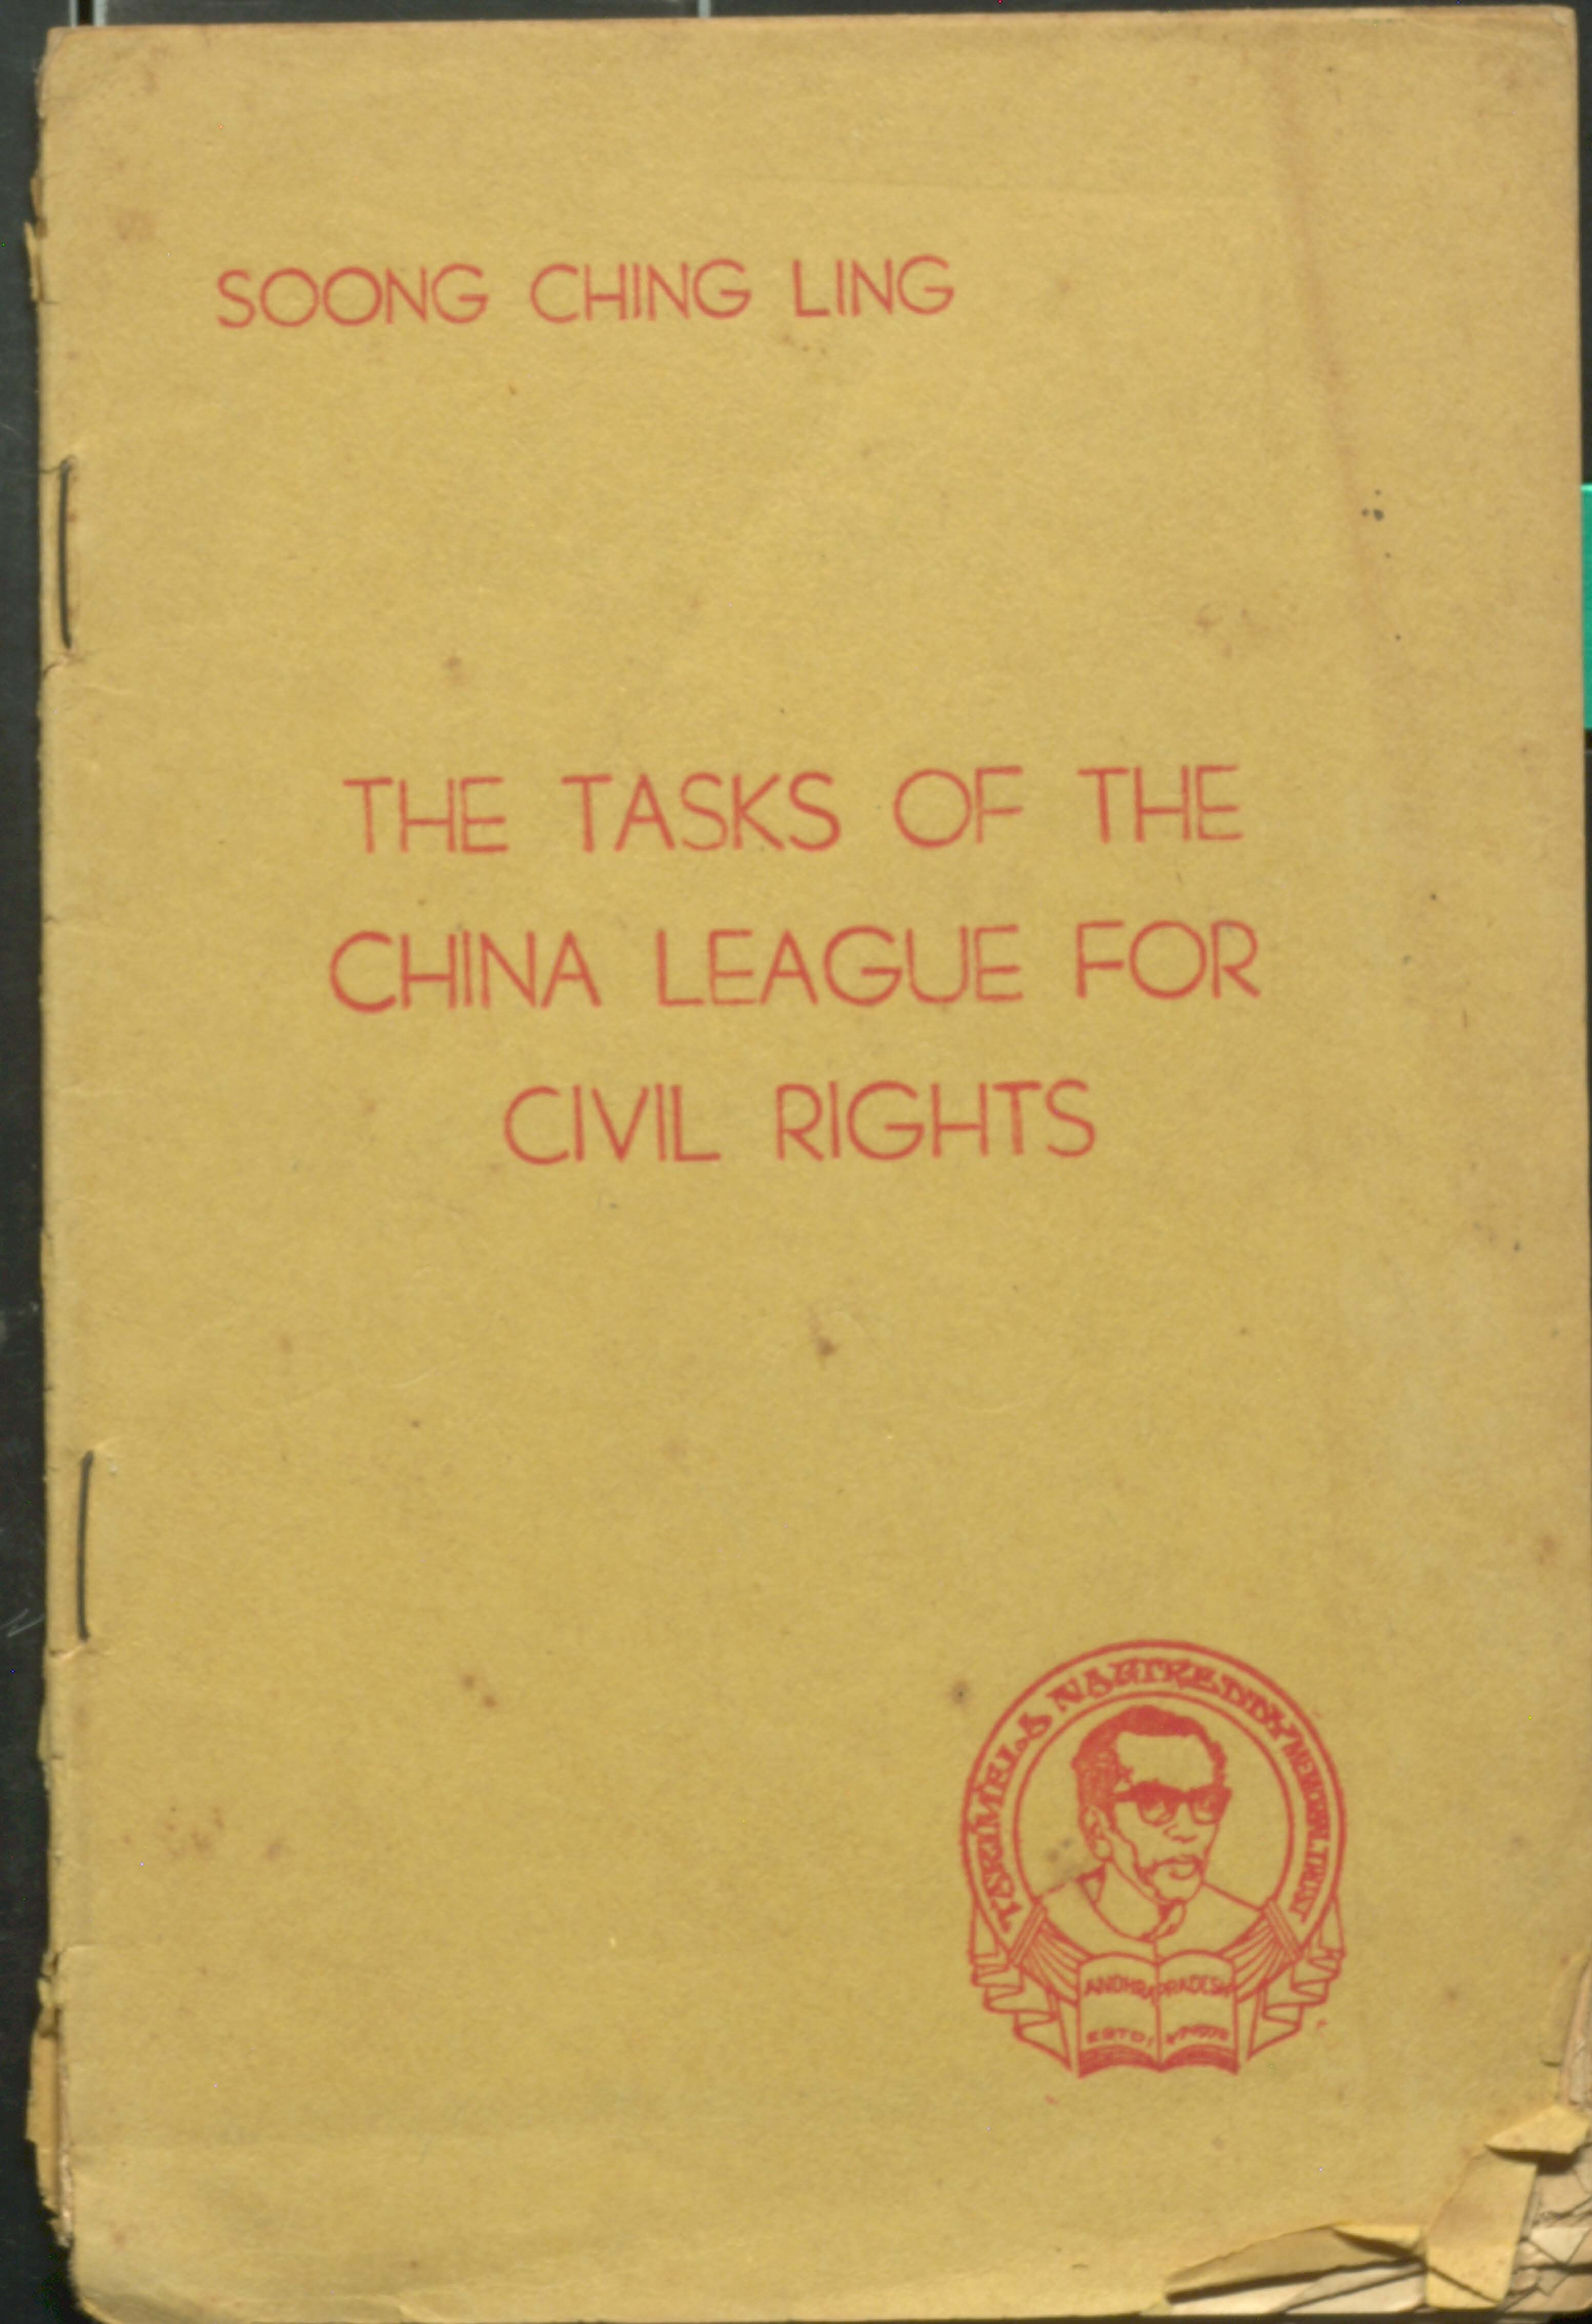 The tasksof the china League for Civil rights